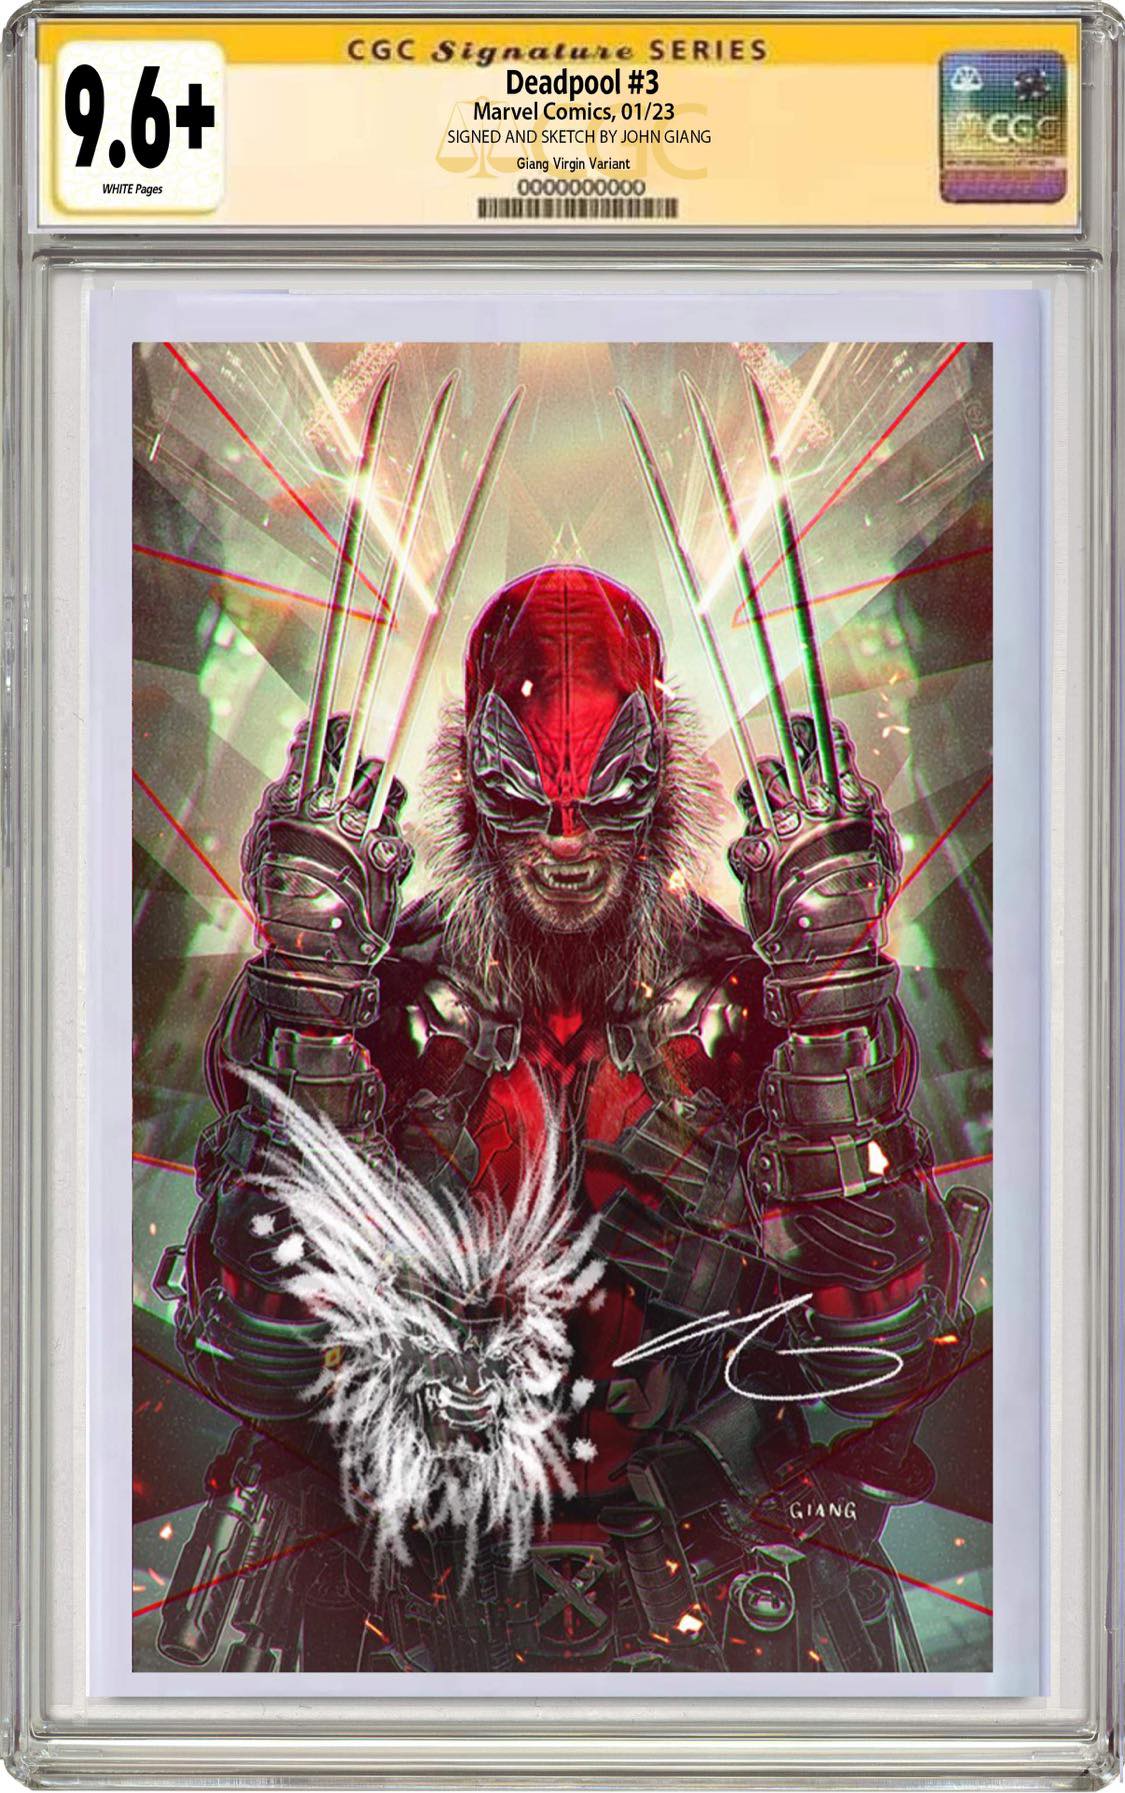 DEADPOOL #3 JOHN GIANG - VIRGIN - CGC 9.6 (OR BETTER) SIGNED/SKETCH (In-Store Now)